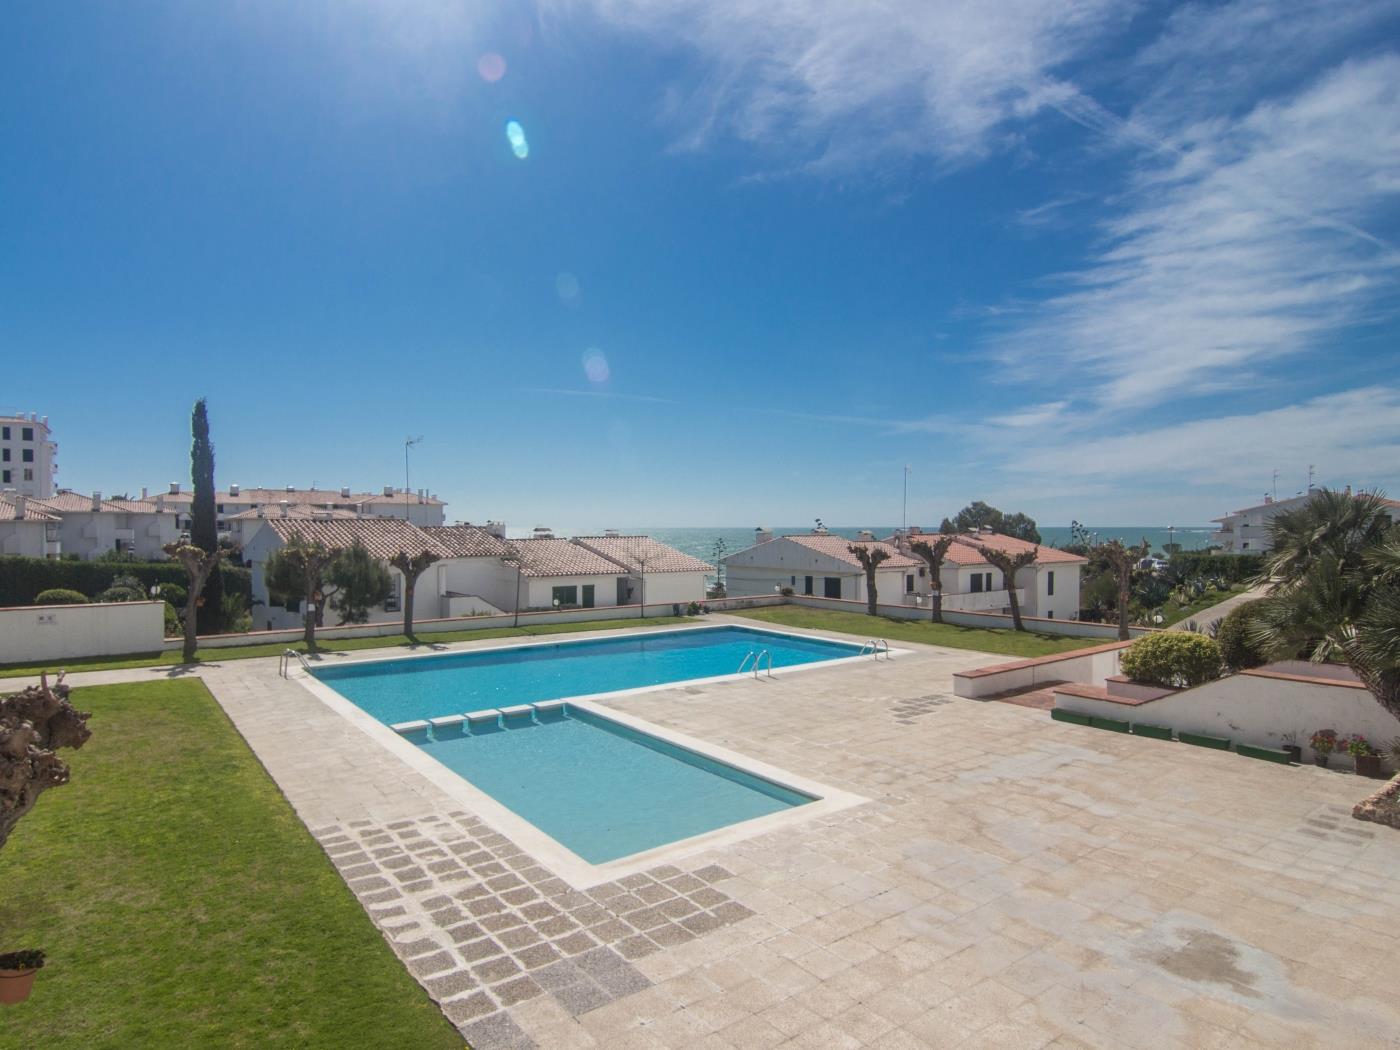 PALM VIEW BY BLAUSITGES Fantastic ocean front apt, stunning sea views and pool. in SITGES